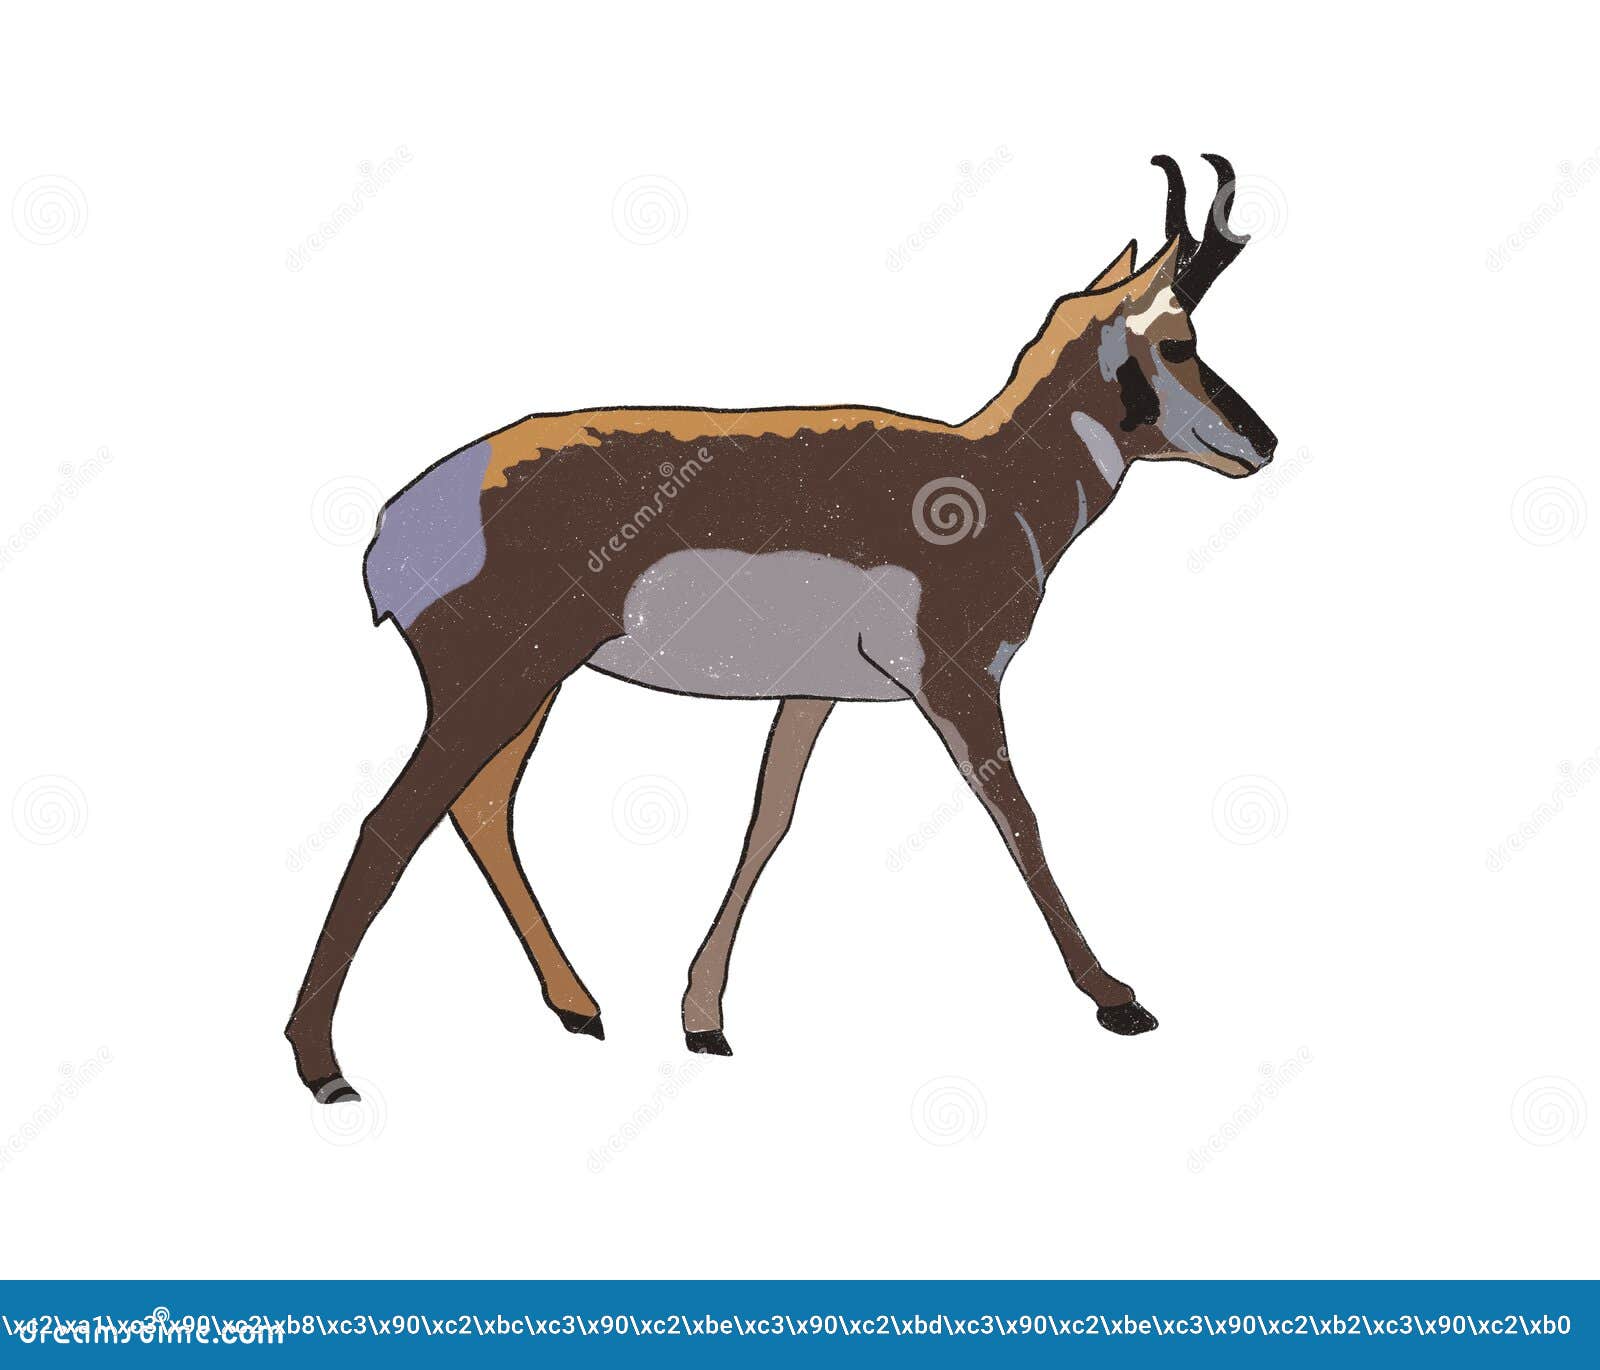 pronghorn. horned ungulate animal. brown coat with white spots.